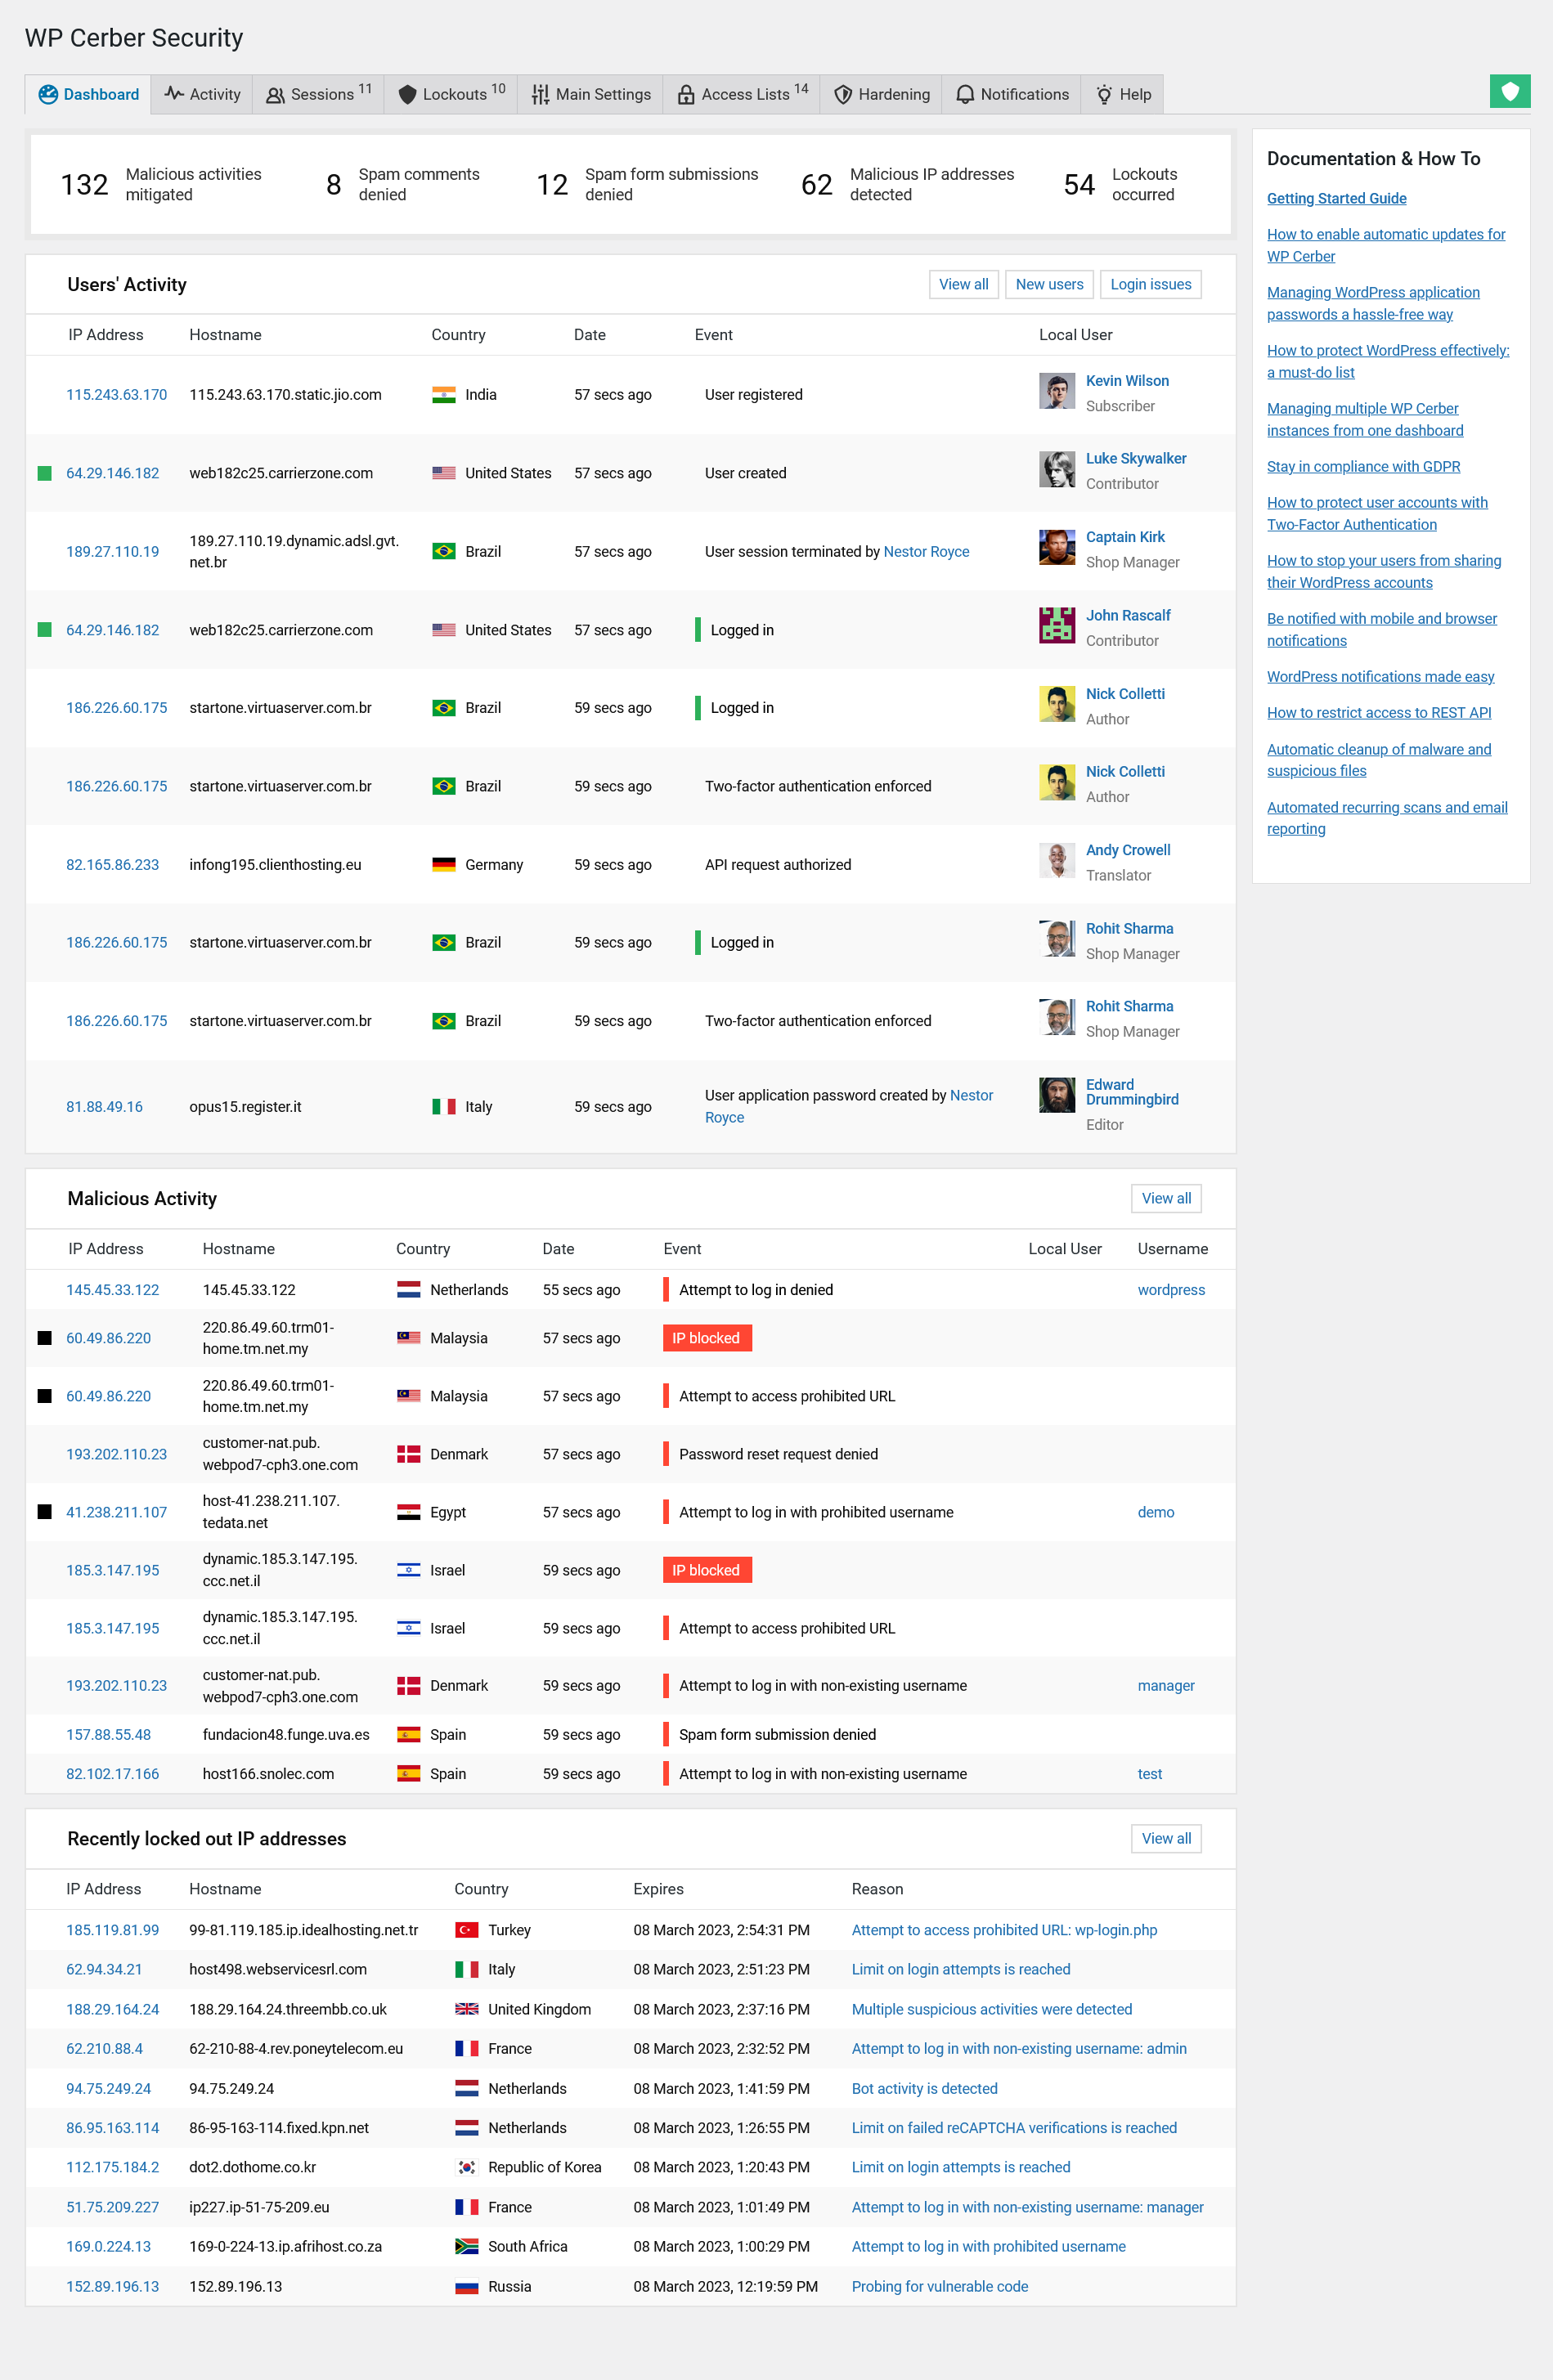 The WP Cerber dashboard provides a real-time overview of important security metrics, displays activity of WordPress users, and shows important security events.